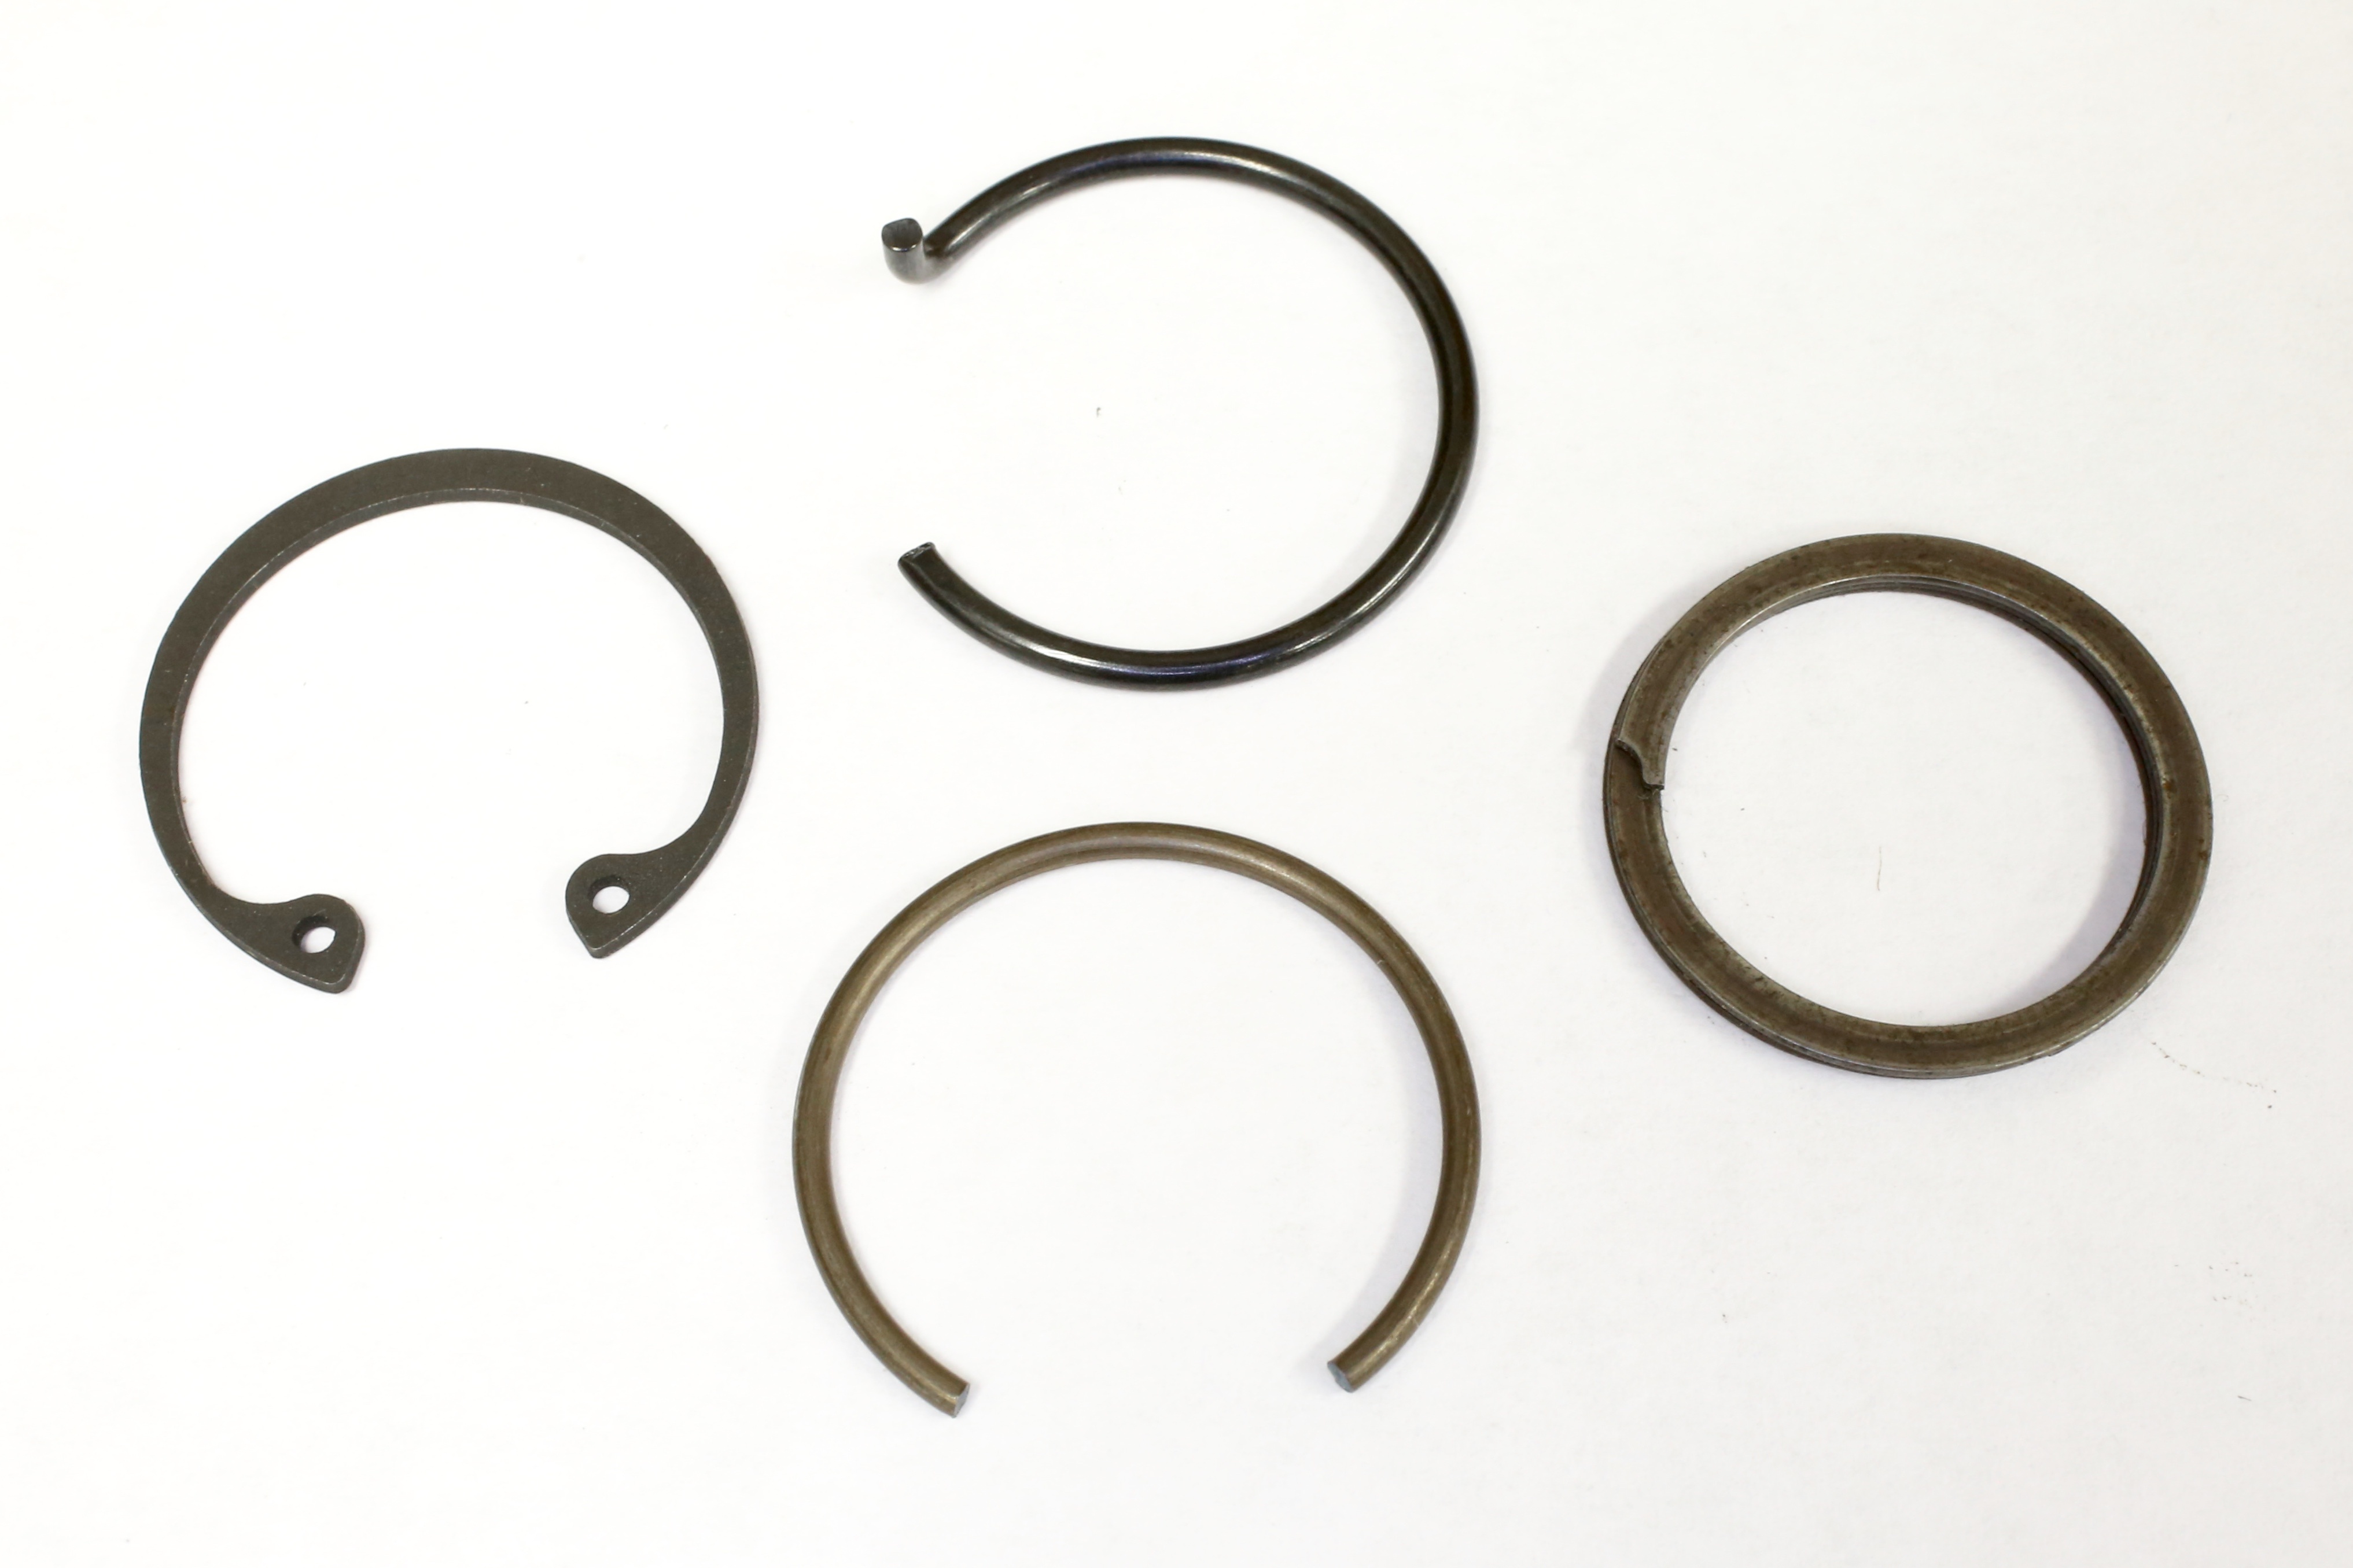 Buy Full Snap Ring Set (4) for 1 U-joint - Early Bronco